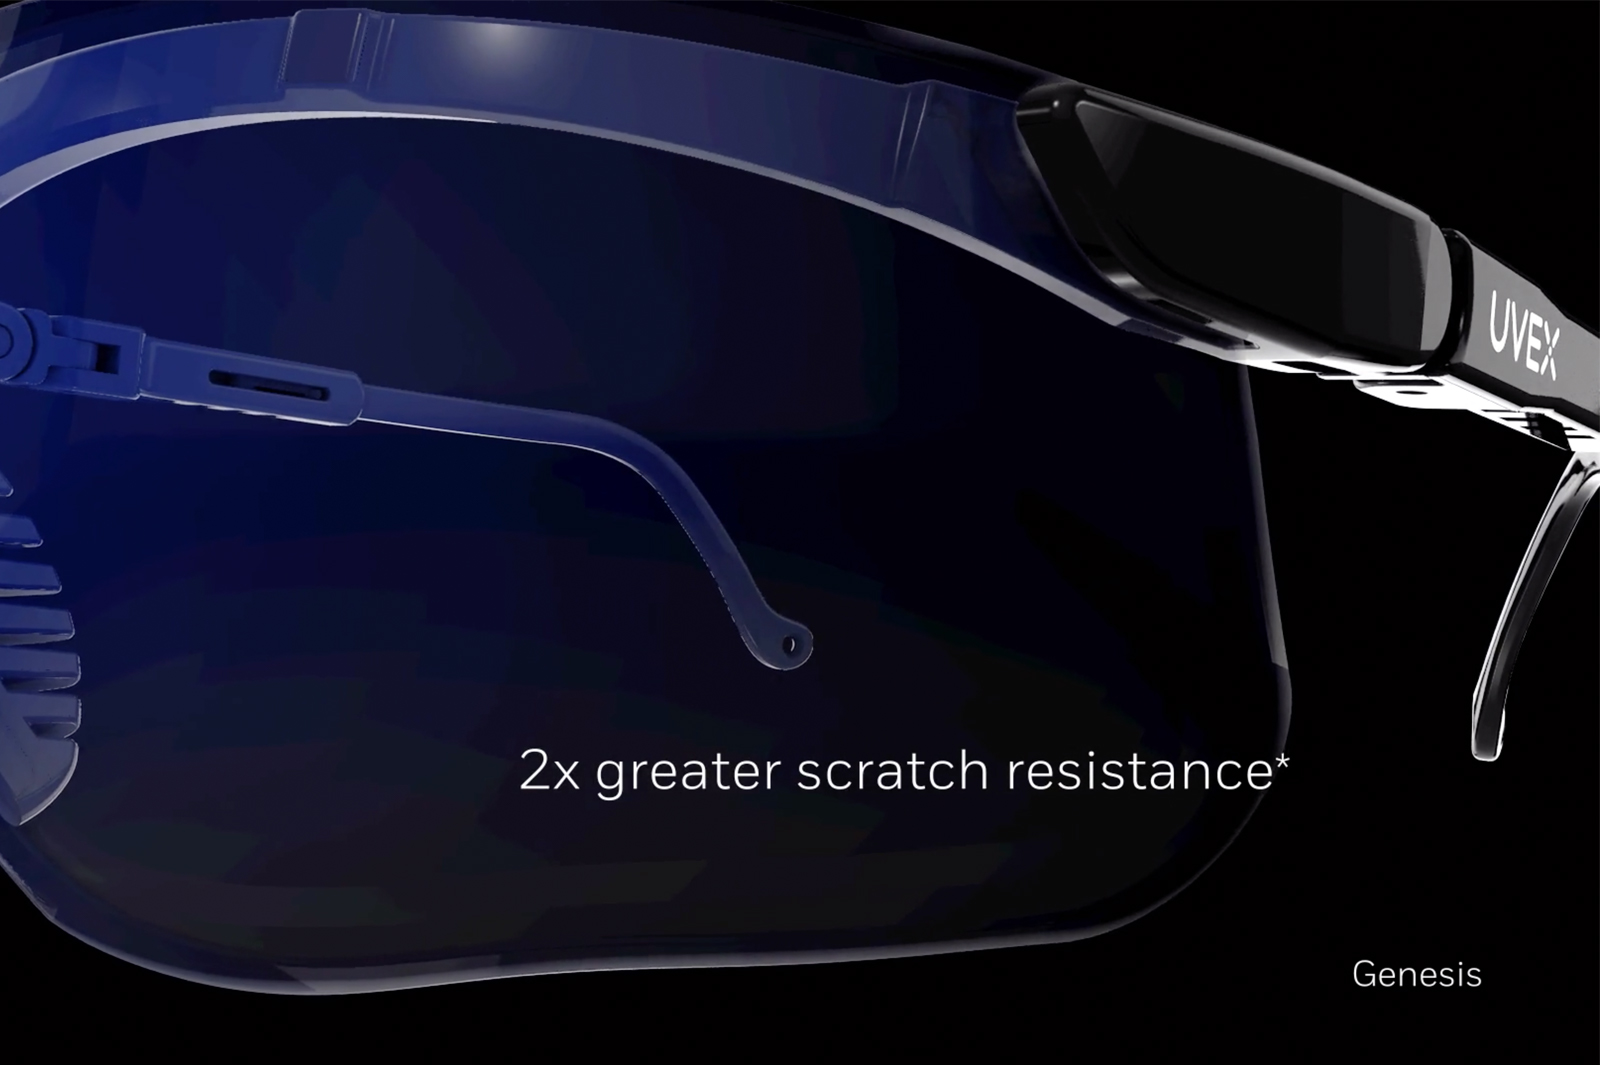 Close up of lenses with 2x greater scratch resistance. UVEX - Genesis